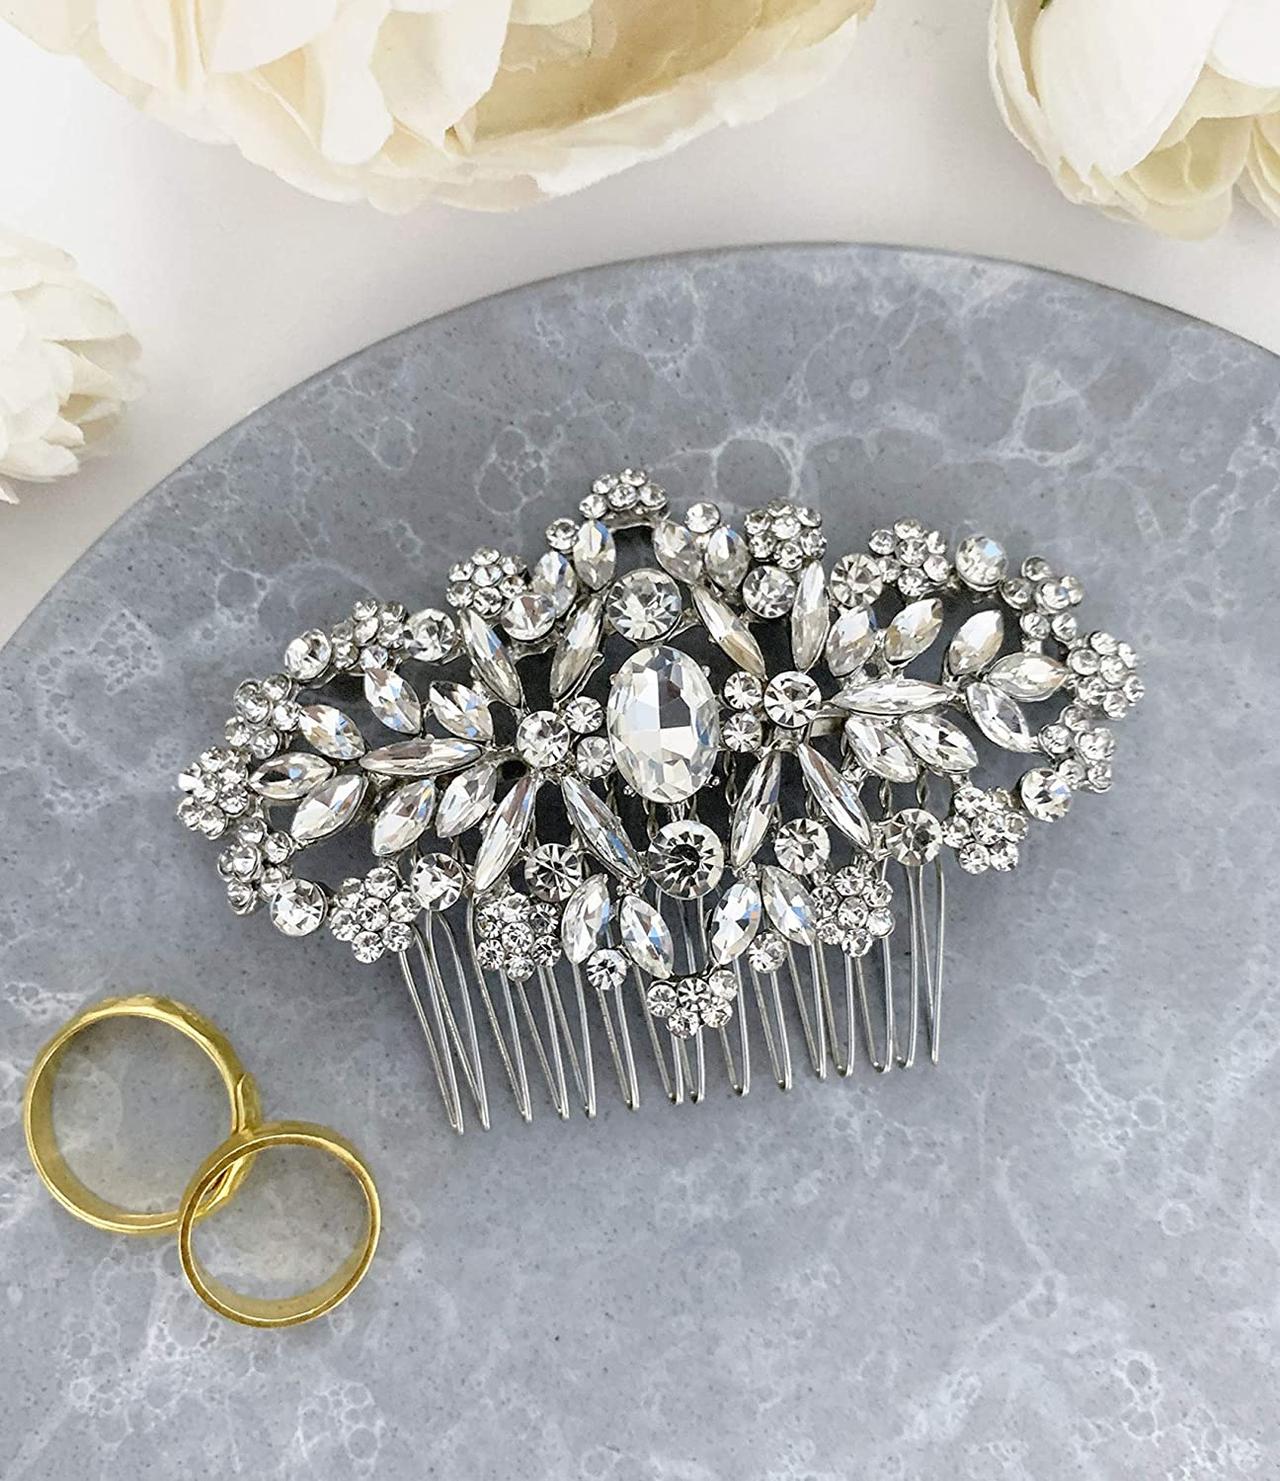 wedding bridal comb Purple Pearl: Small decorative haircomb with little flowers and leaves Weddings Accessories Hair Accessories Decorative Combs hair accessory pearlescent vintage 